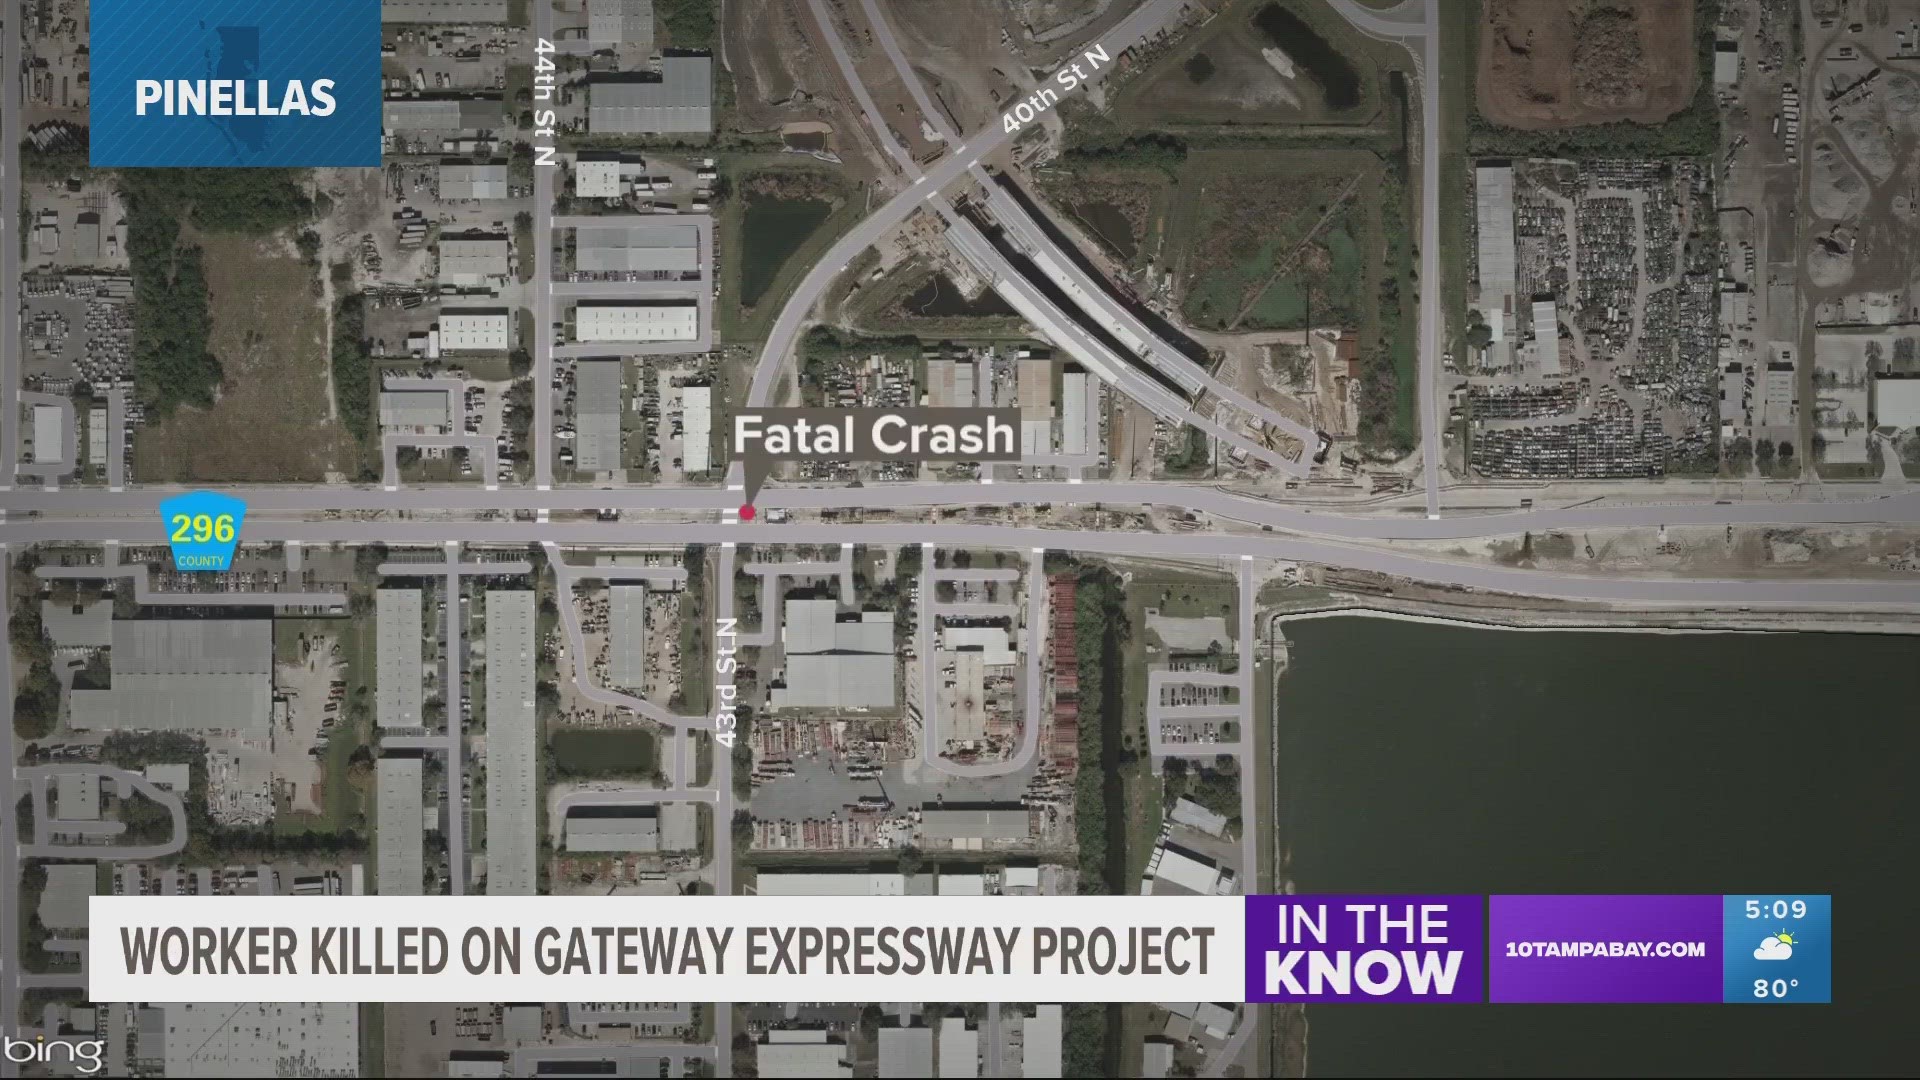 Authorities say the 55-year-old construction worker was flagging traffic for the Gateway construction project when he was hit.